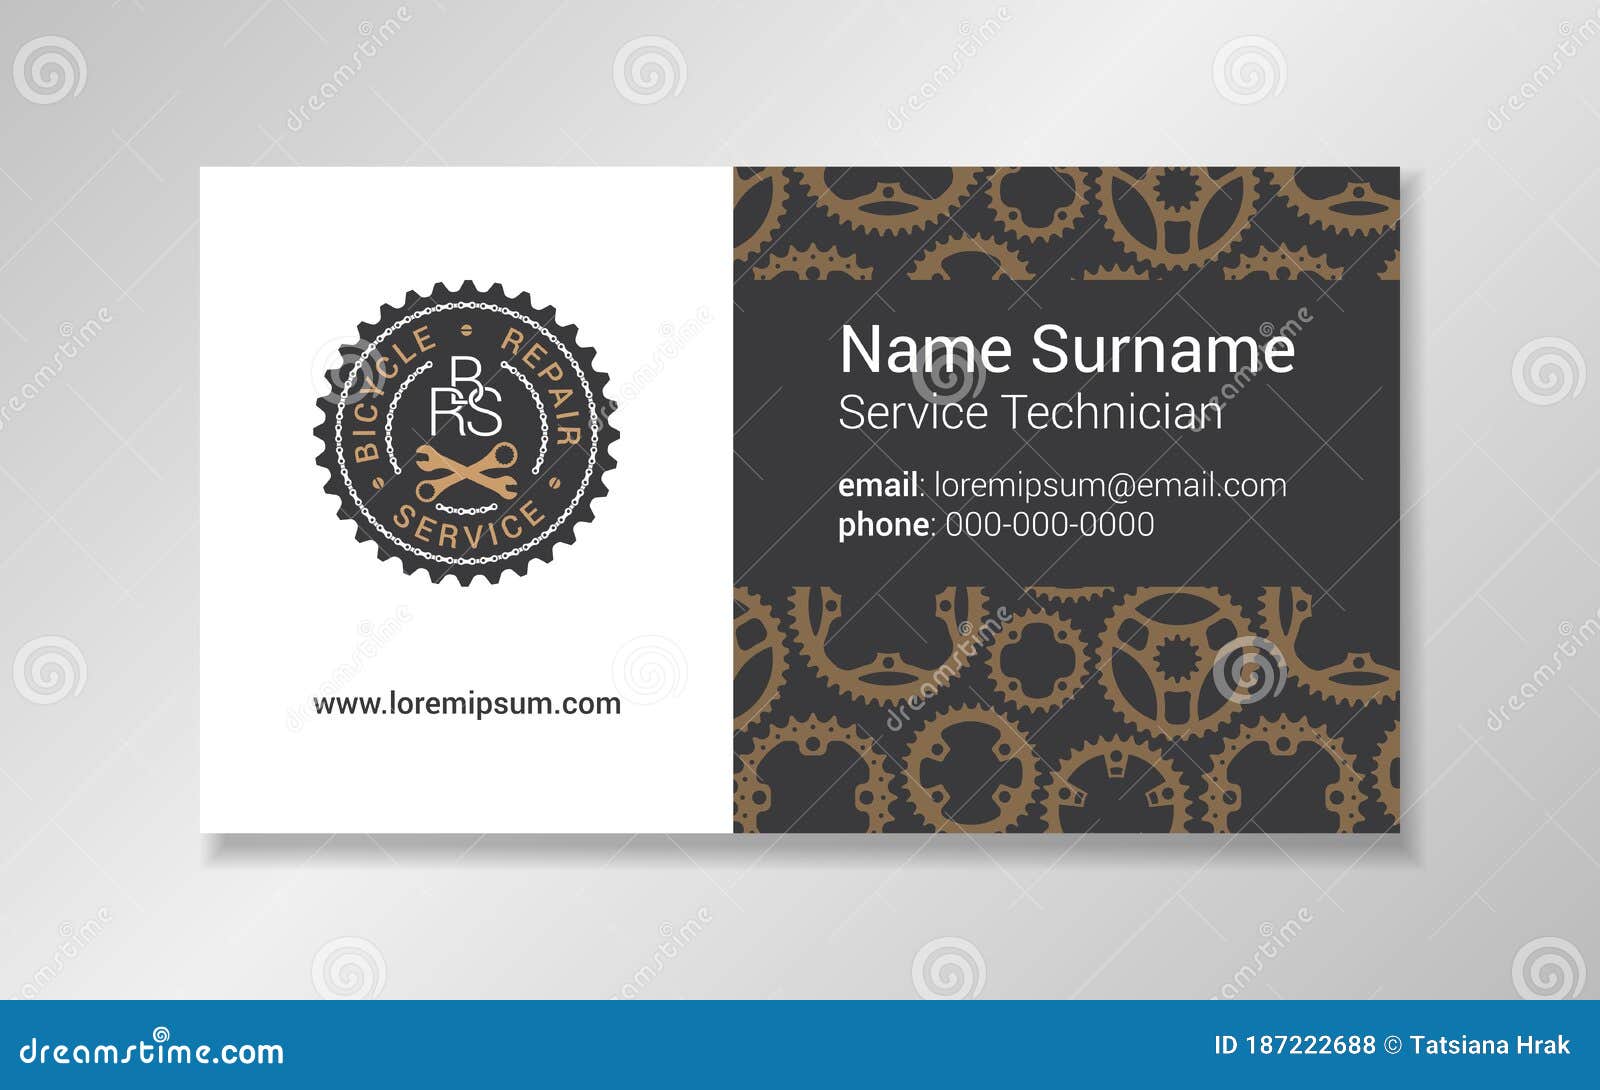 Bicycle Repair Business Card Design Template Stock Vector Illustration Of Card Concept 187222688